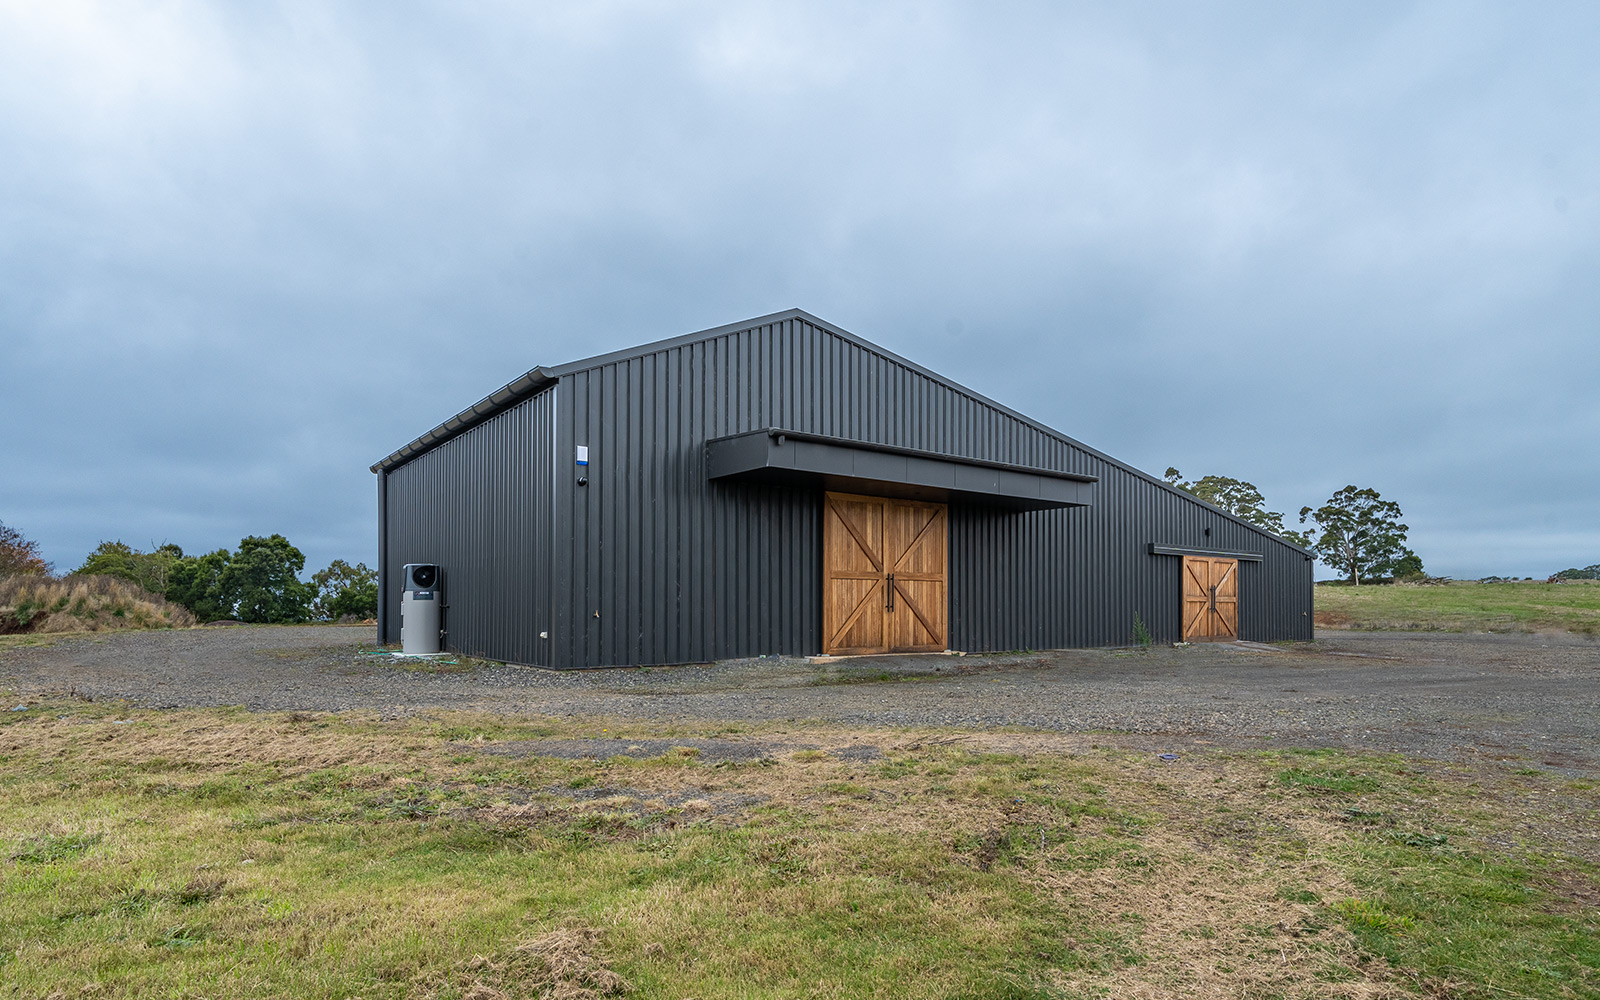 Phillip Moraghan combined tasting and brewery shed